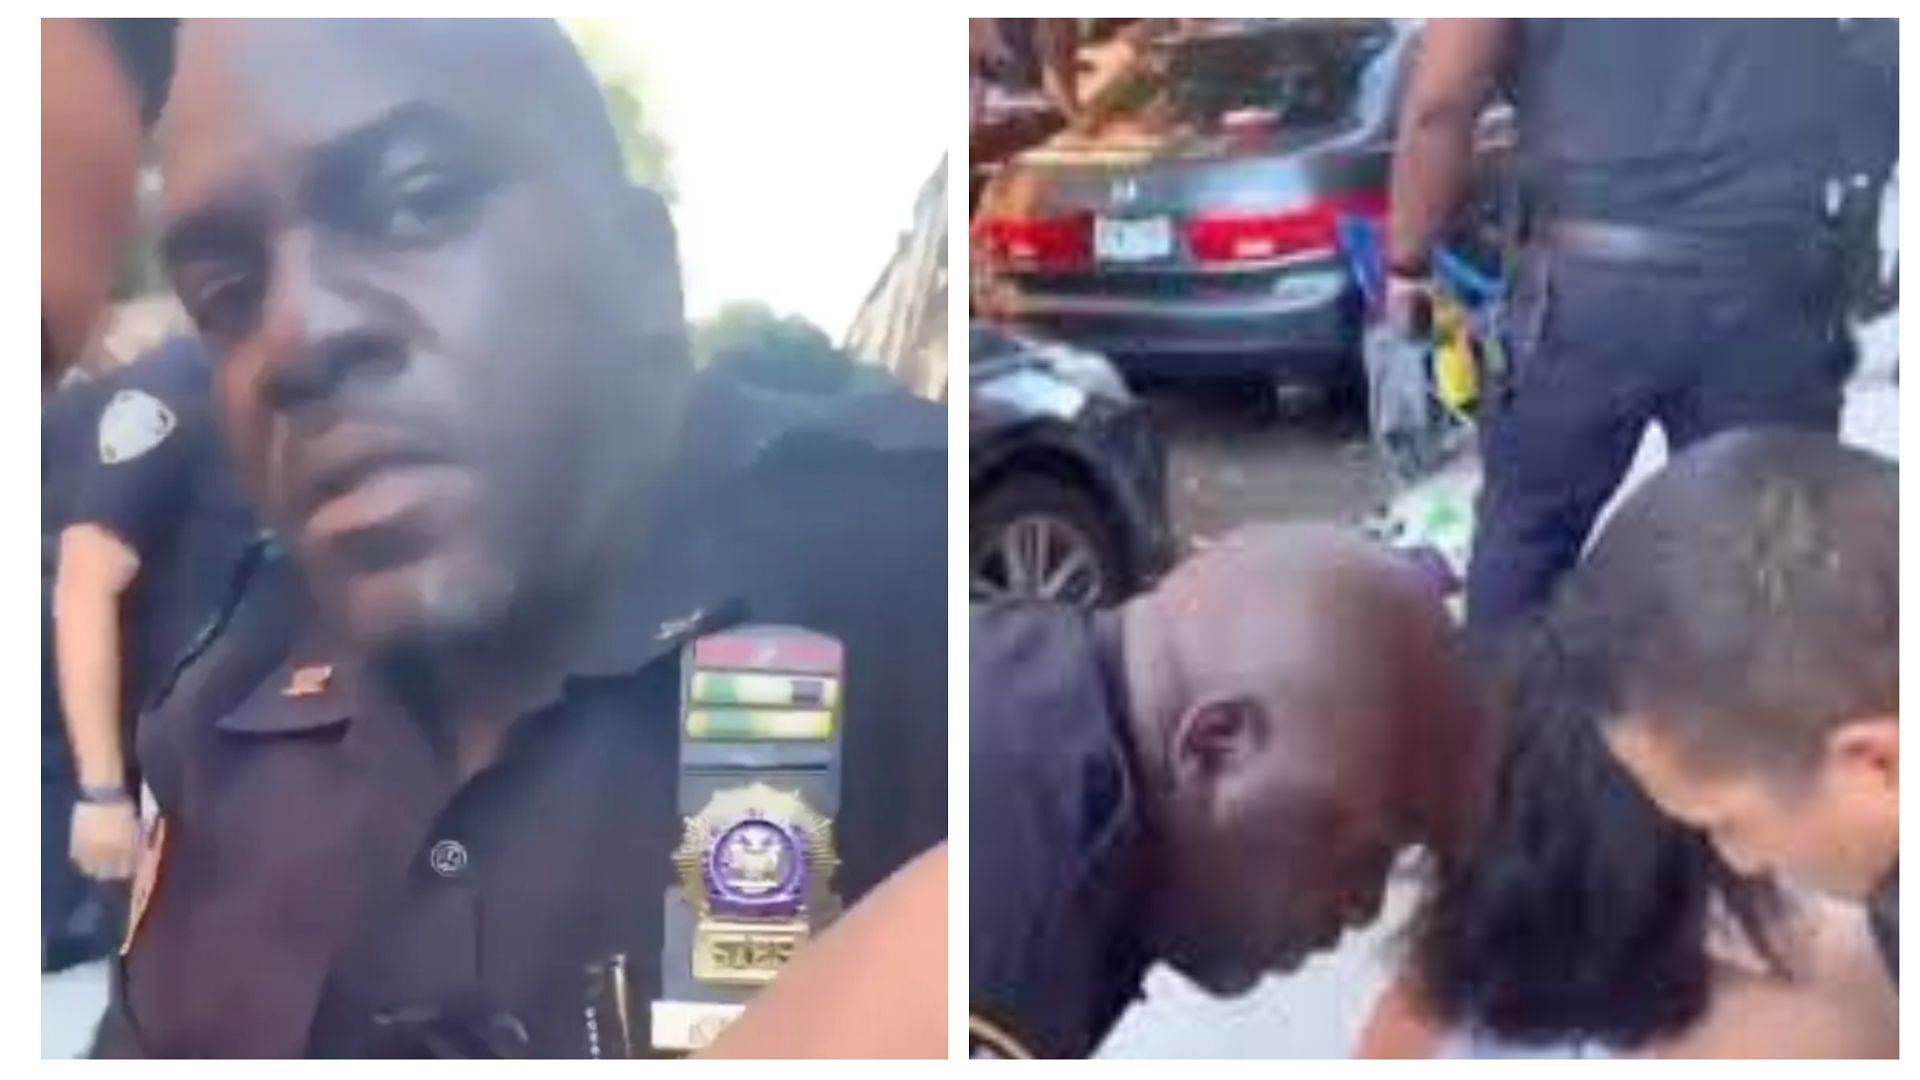 Watch Video Showing Nypd Officer Punching Woman During Arrest Goes Viral Online 